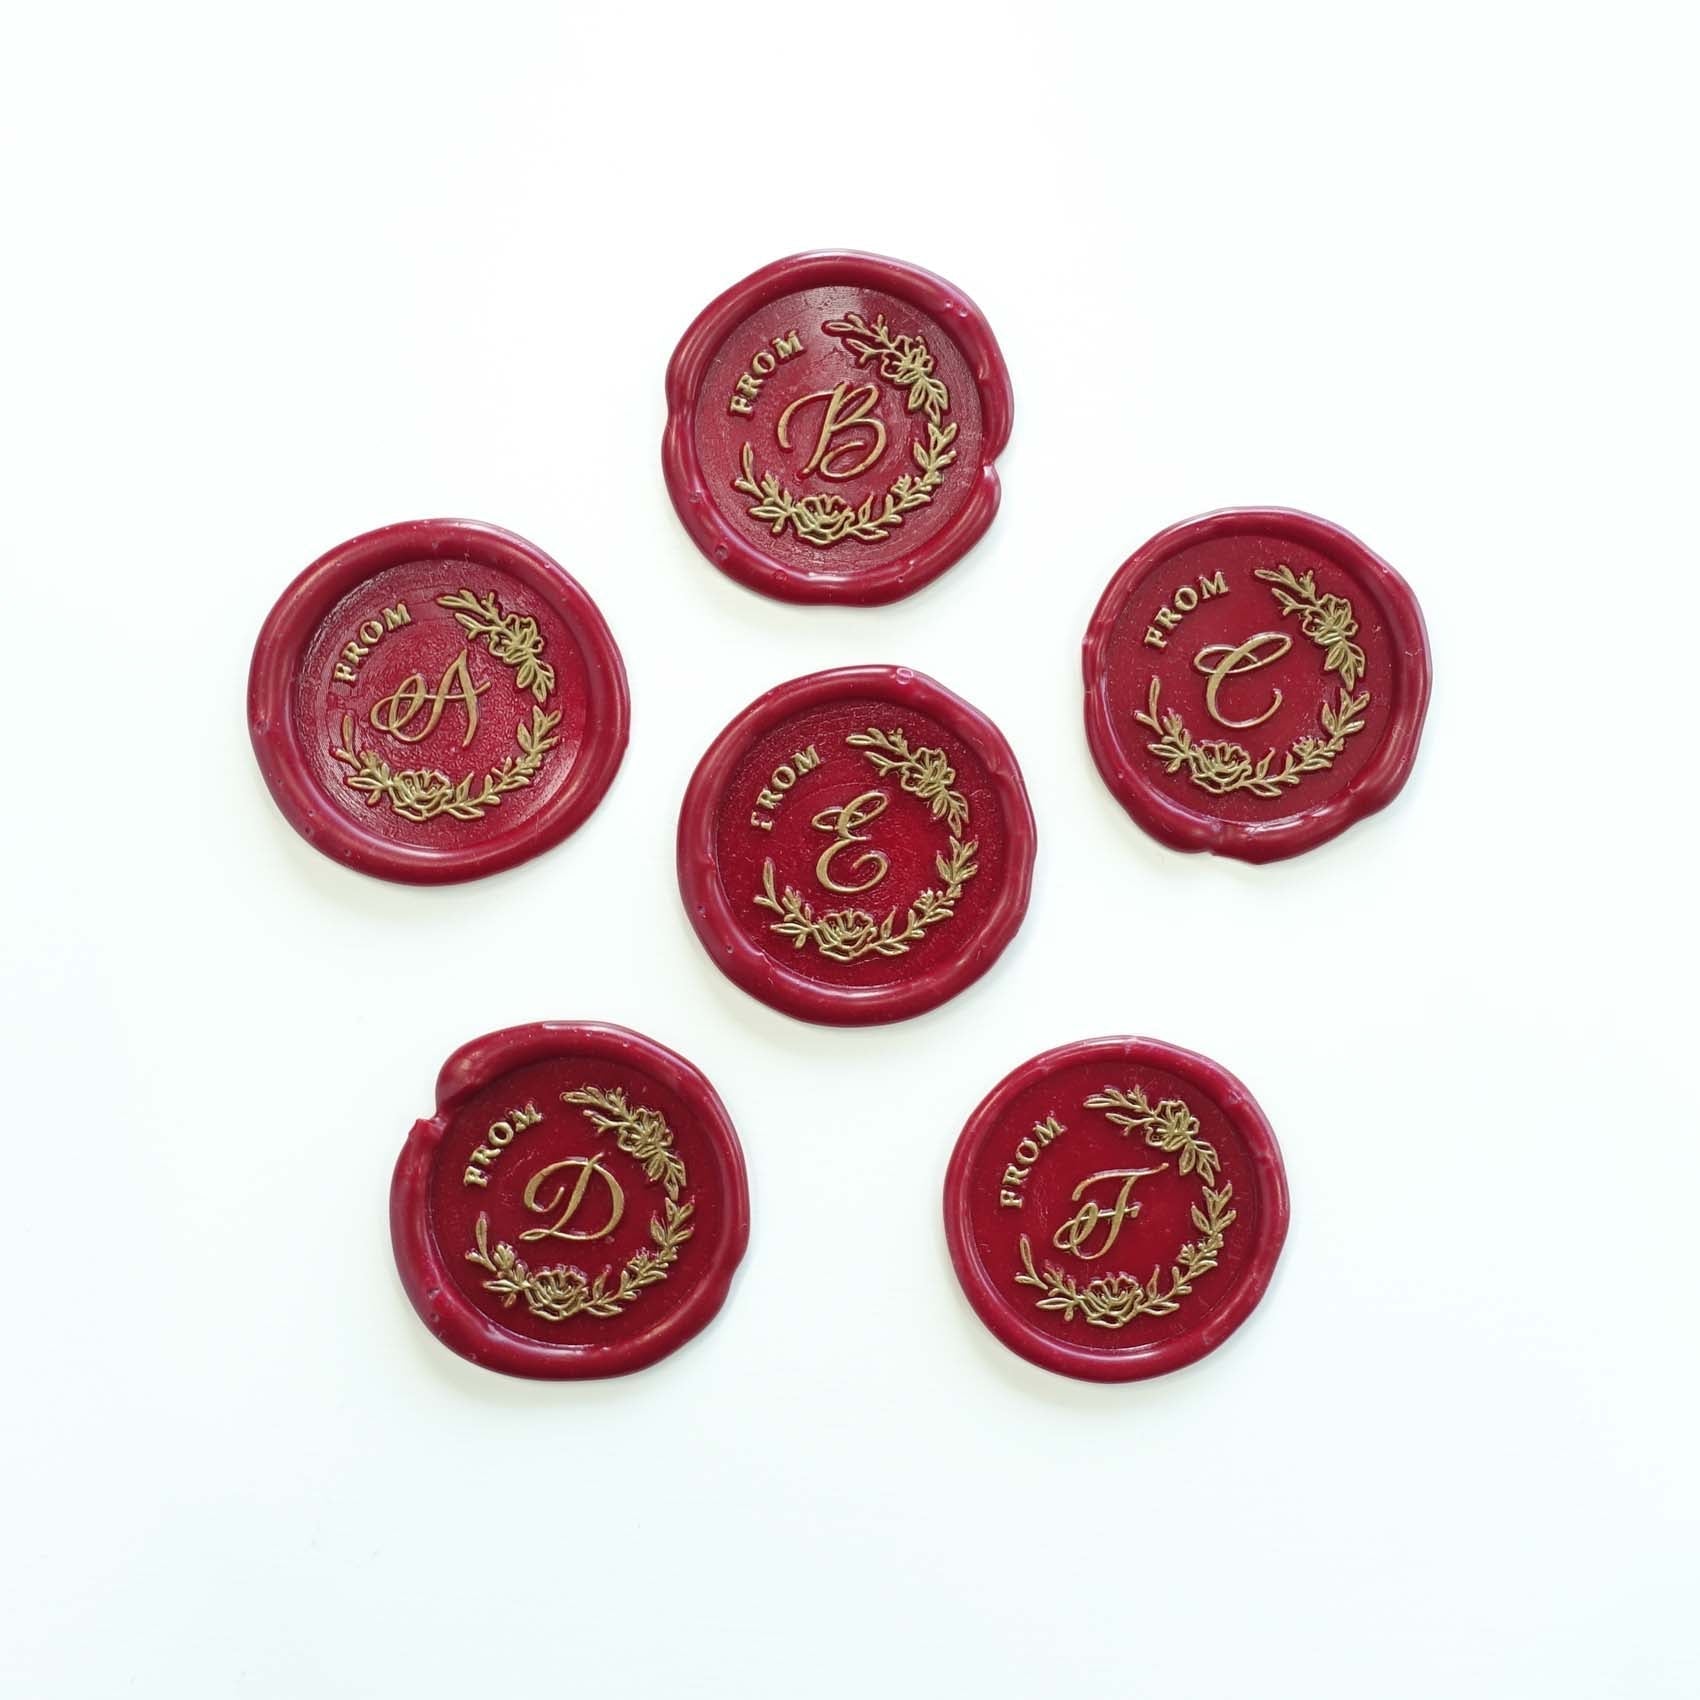 From A to Z Alphabet Letters - Wax Sealing Kit